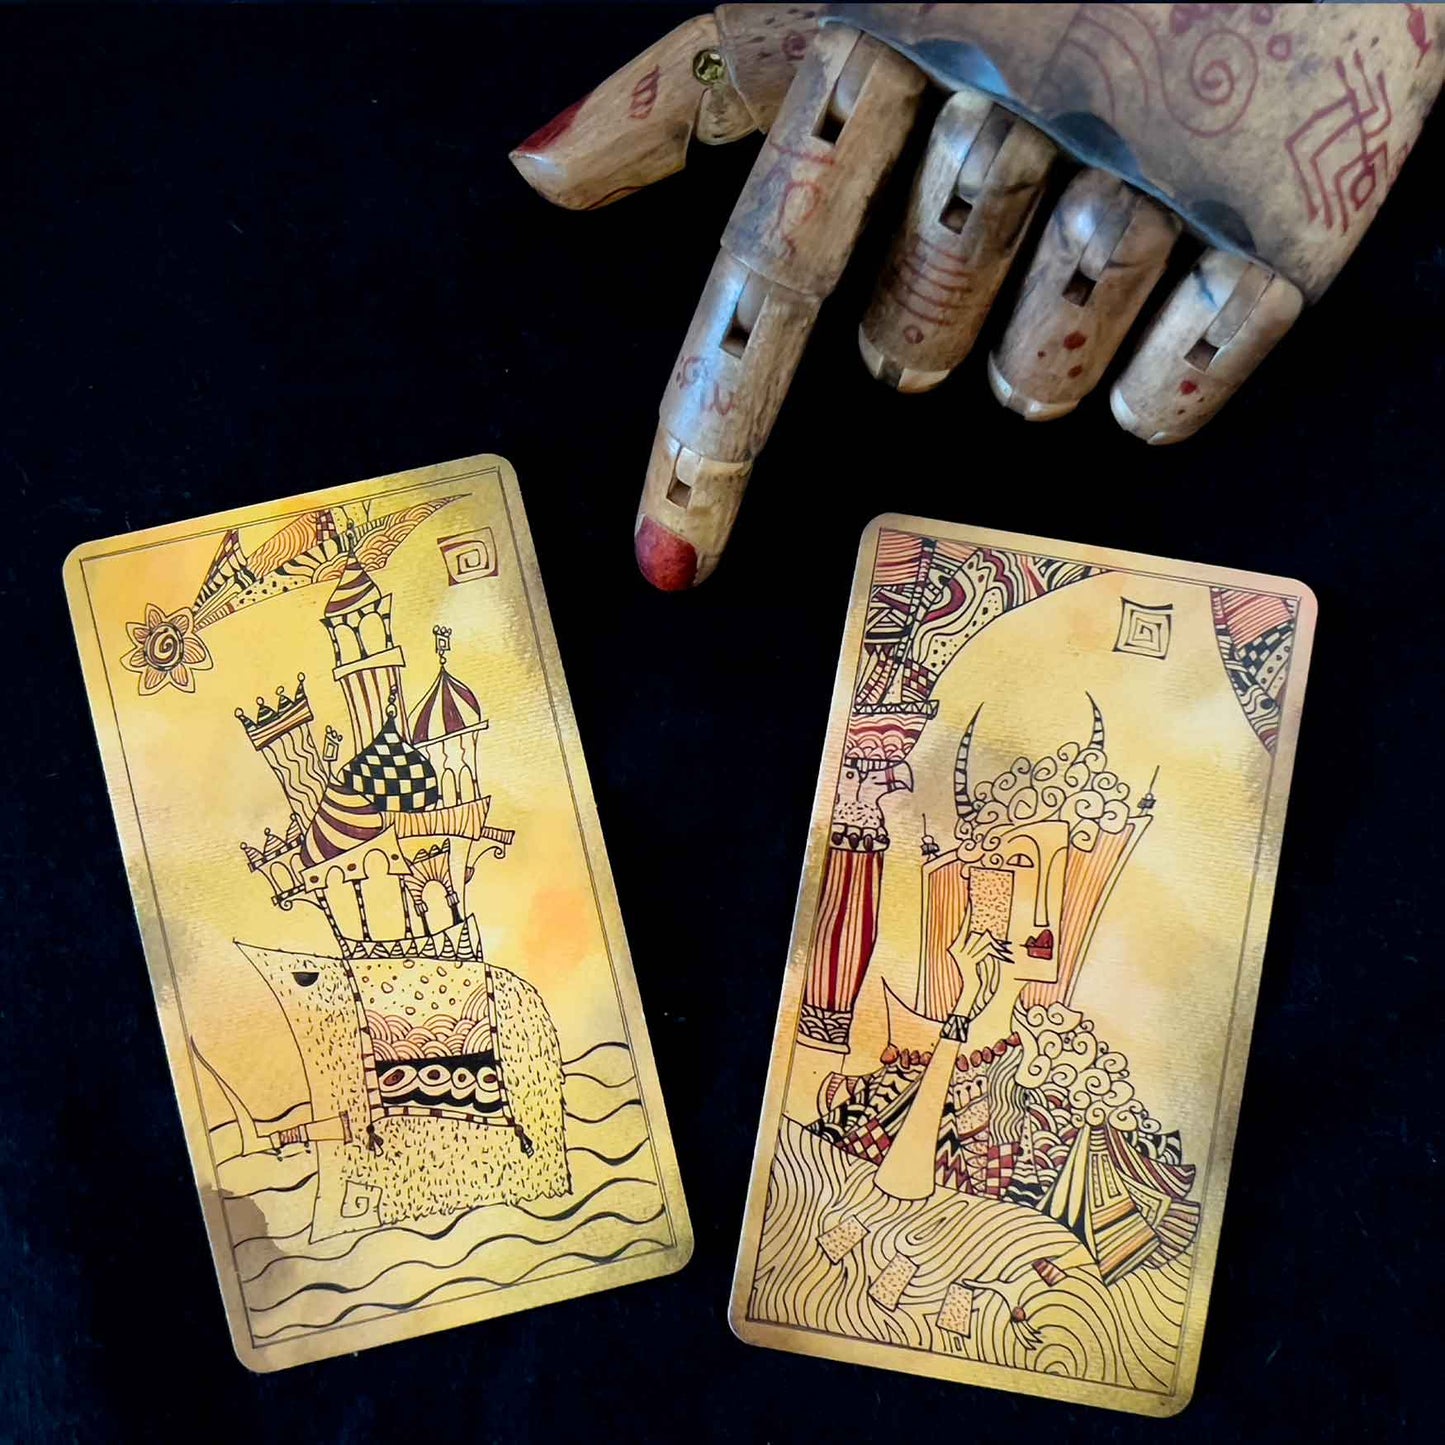 The Book of Shadows: The Lost Code of Tarot